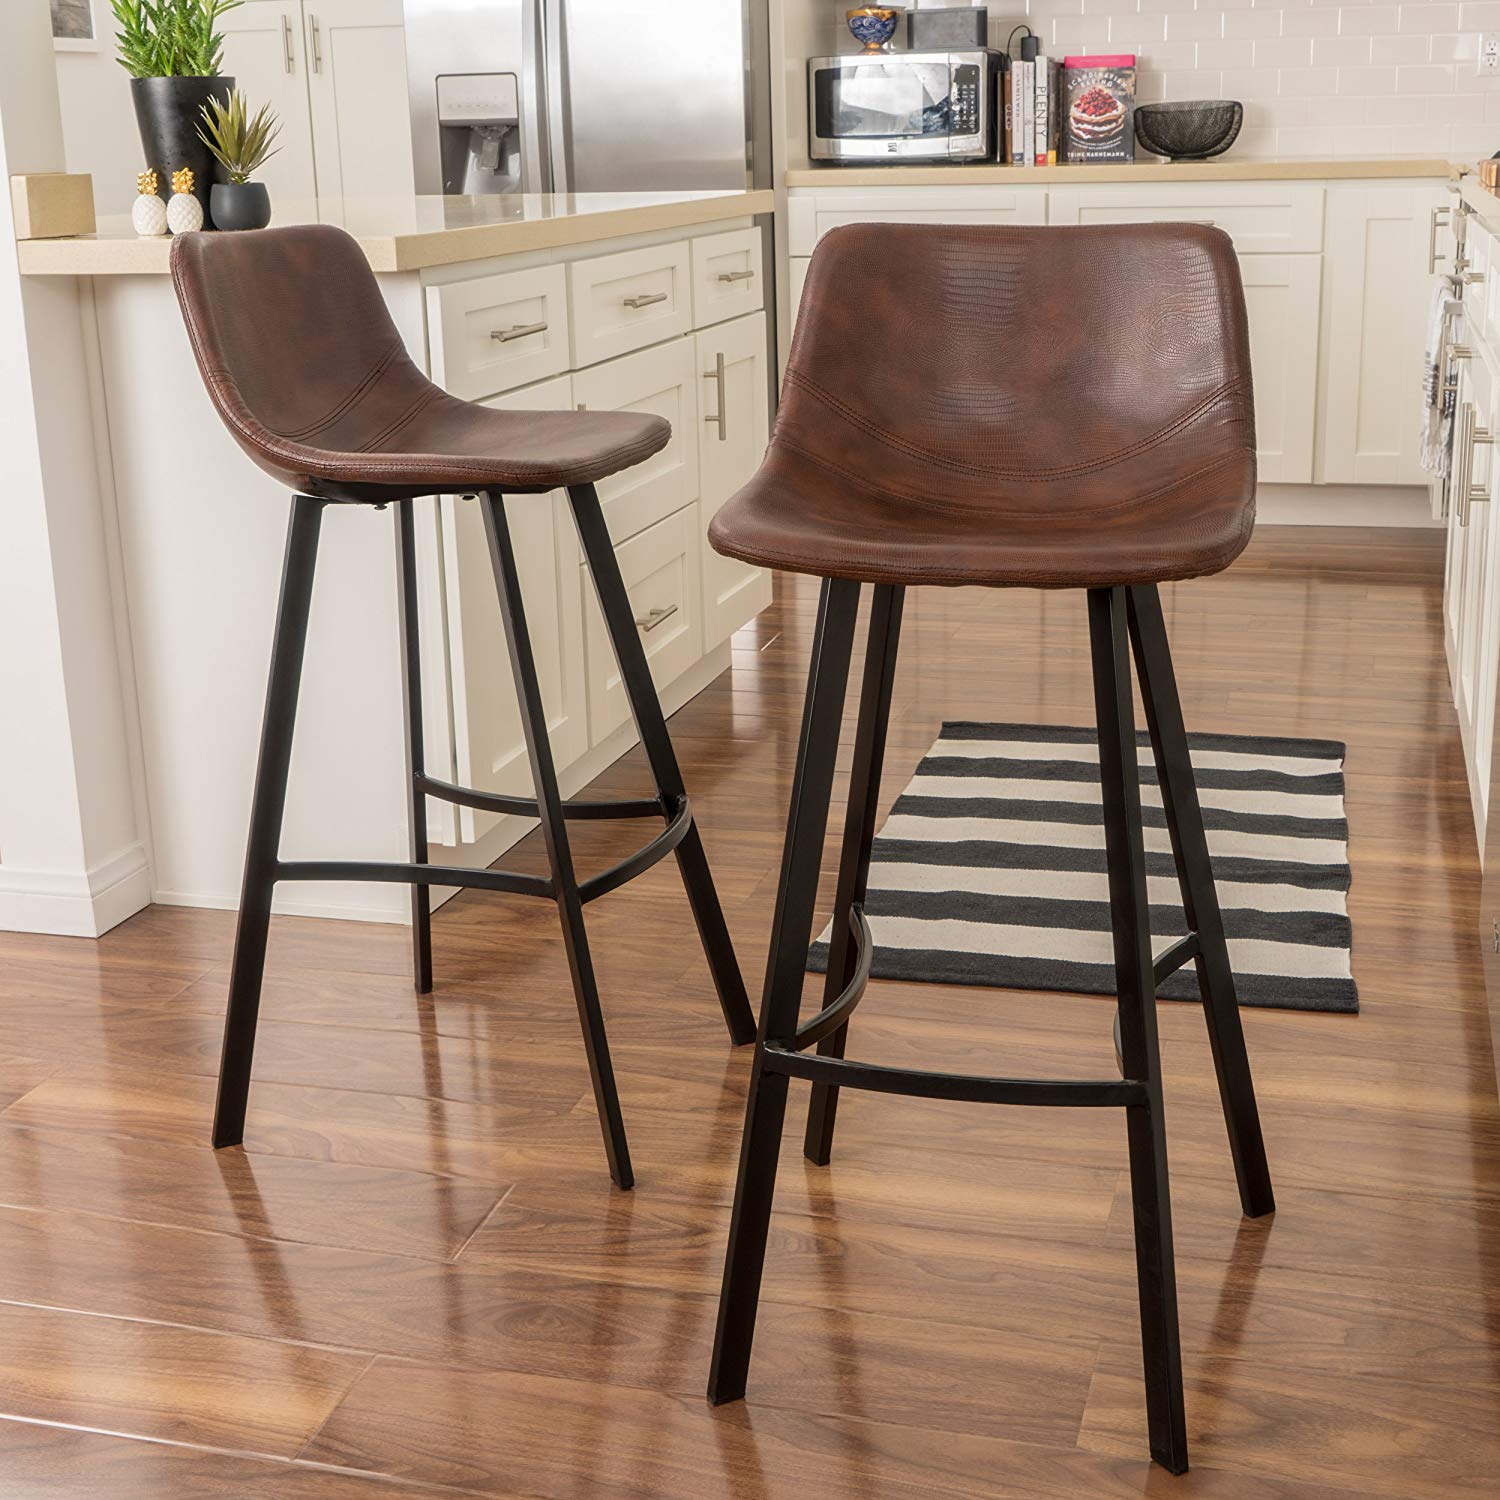 The Top 10 Best Bar Stools Of 2021, Best Leather Bar Stools